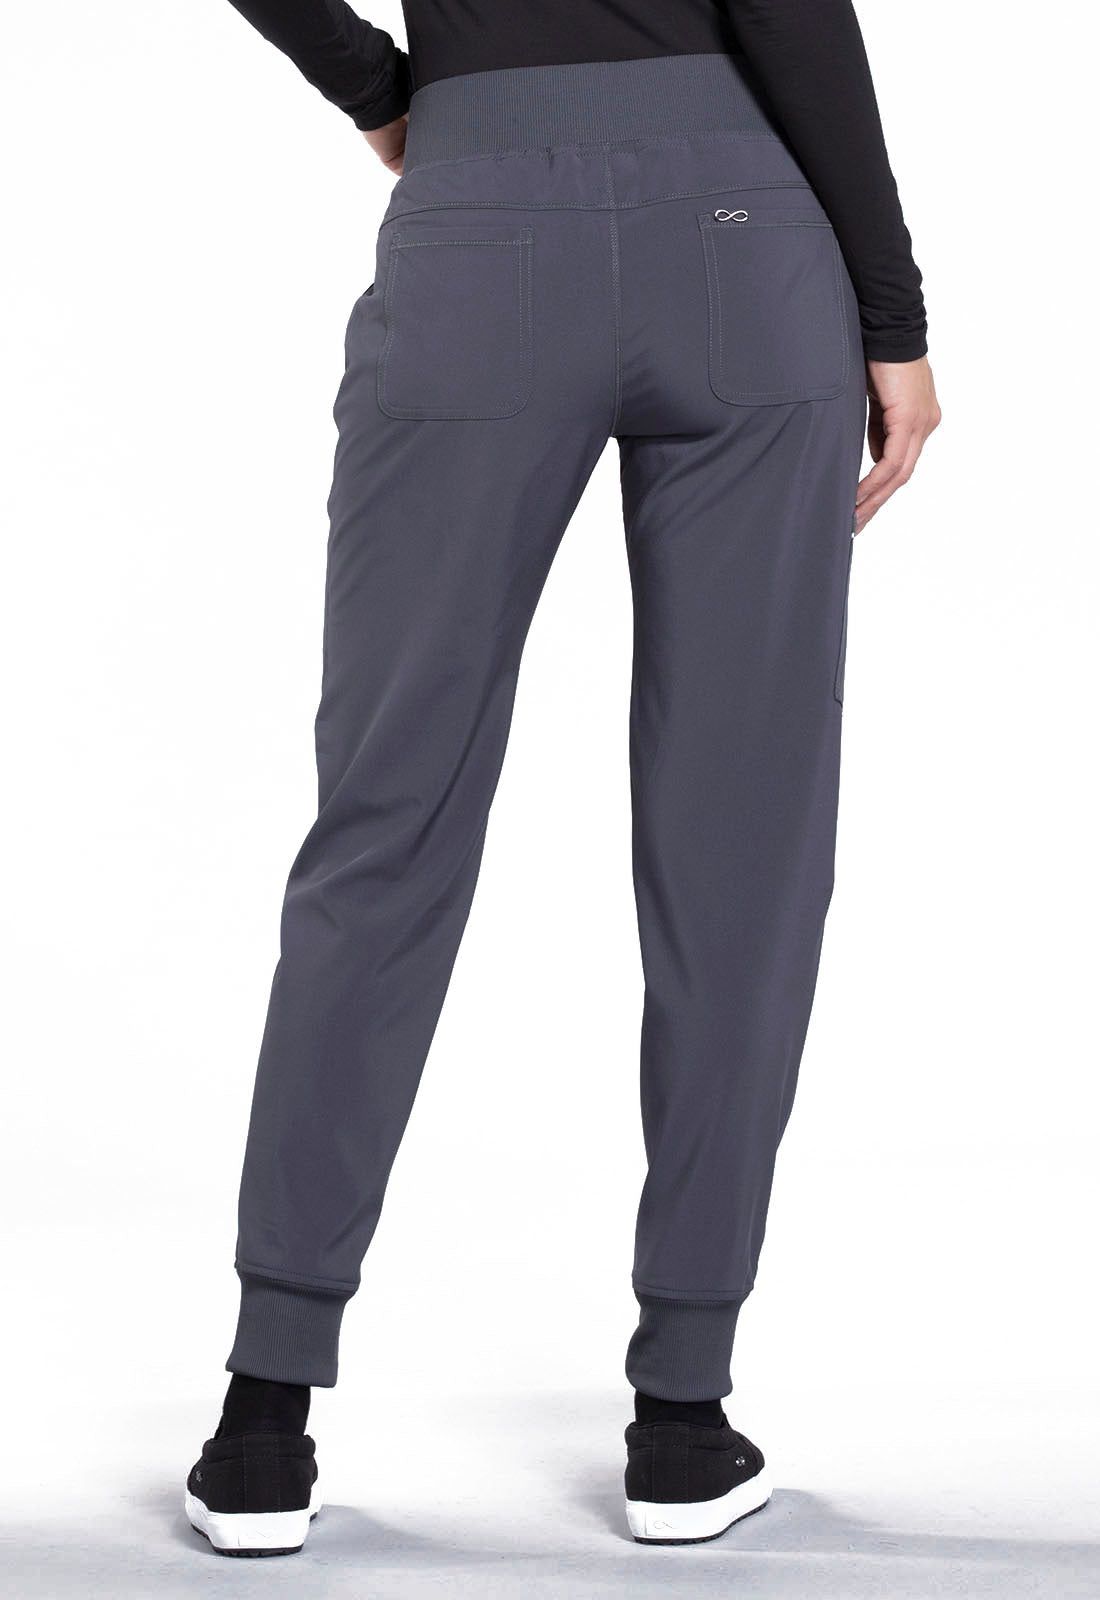 Cherokee Infinity CK110A Women's Jogger Pant - TALL pewter grey back 